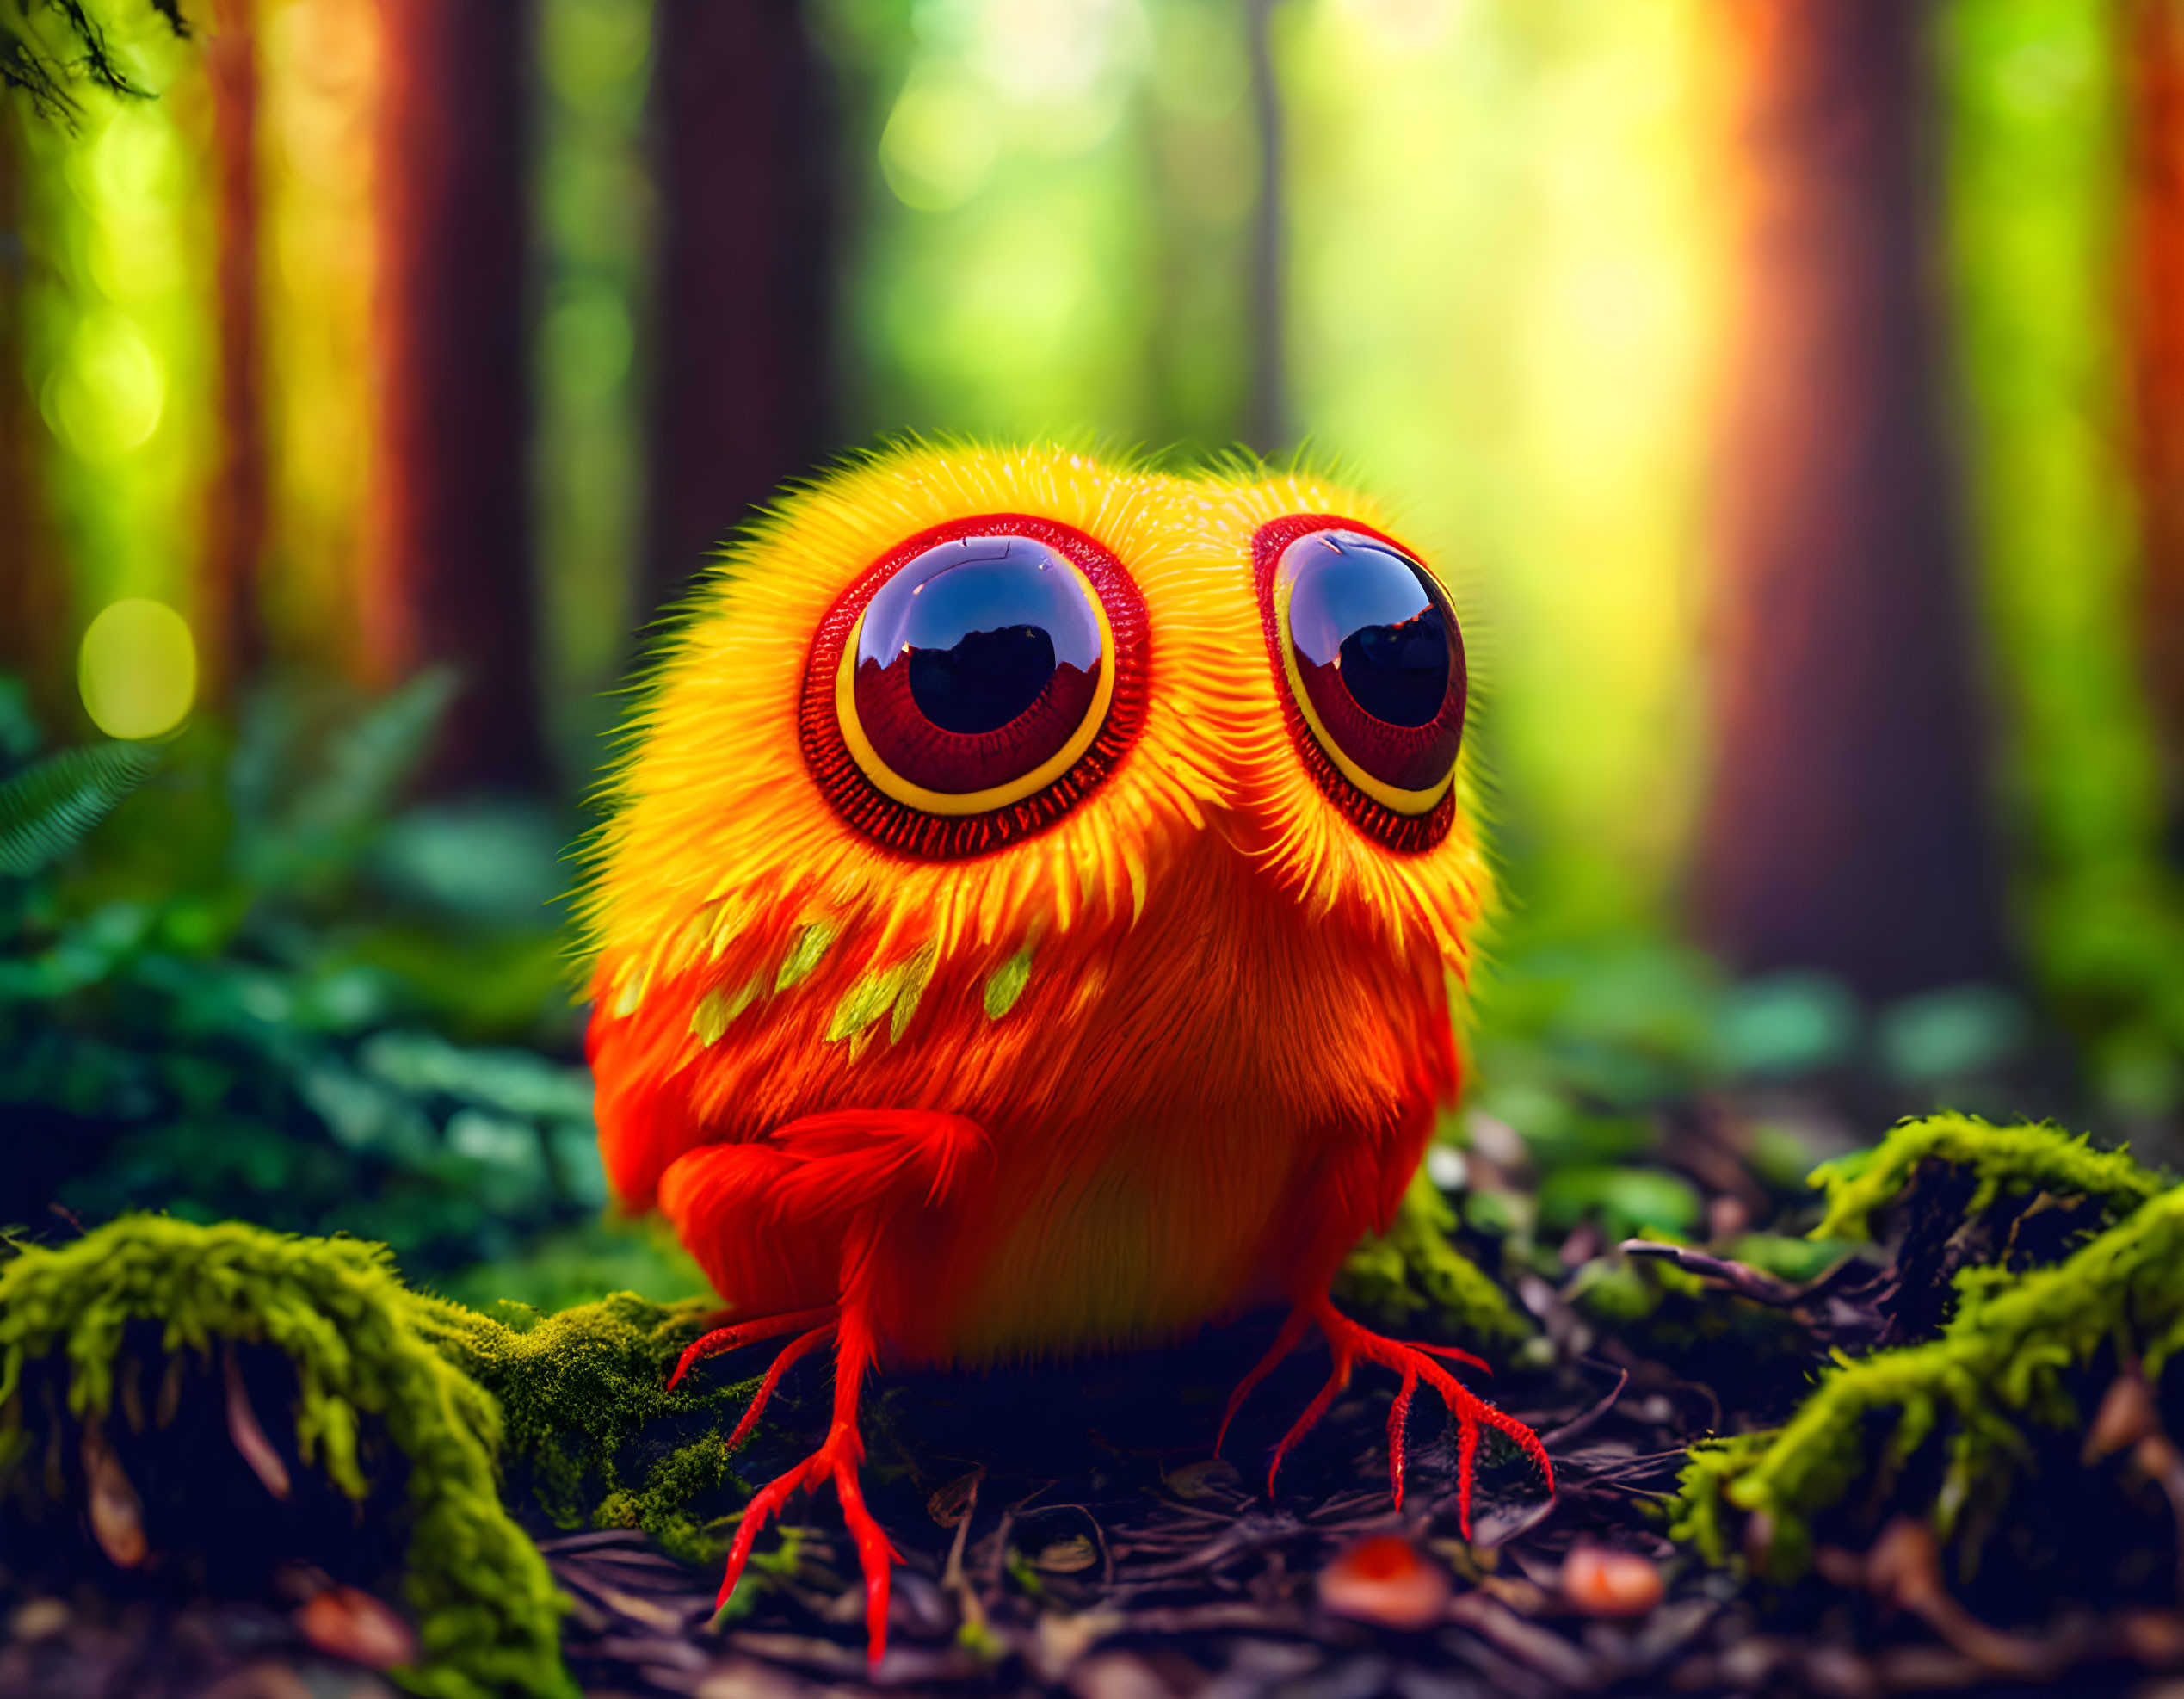 Cute creature of the forest